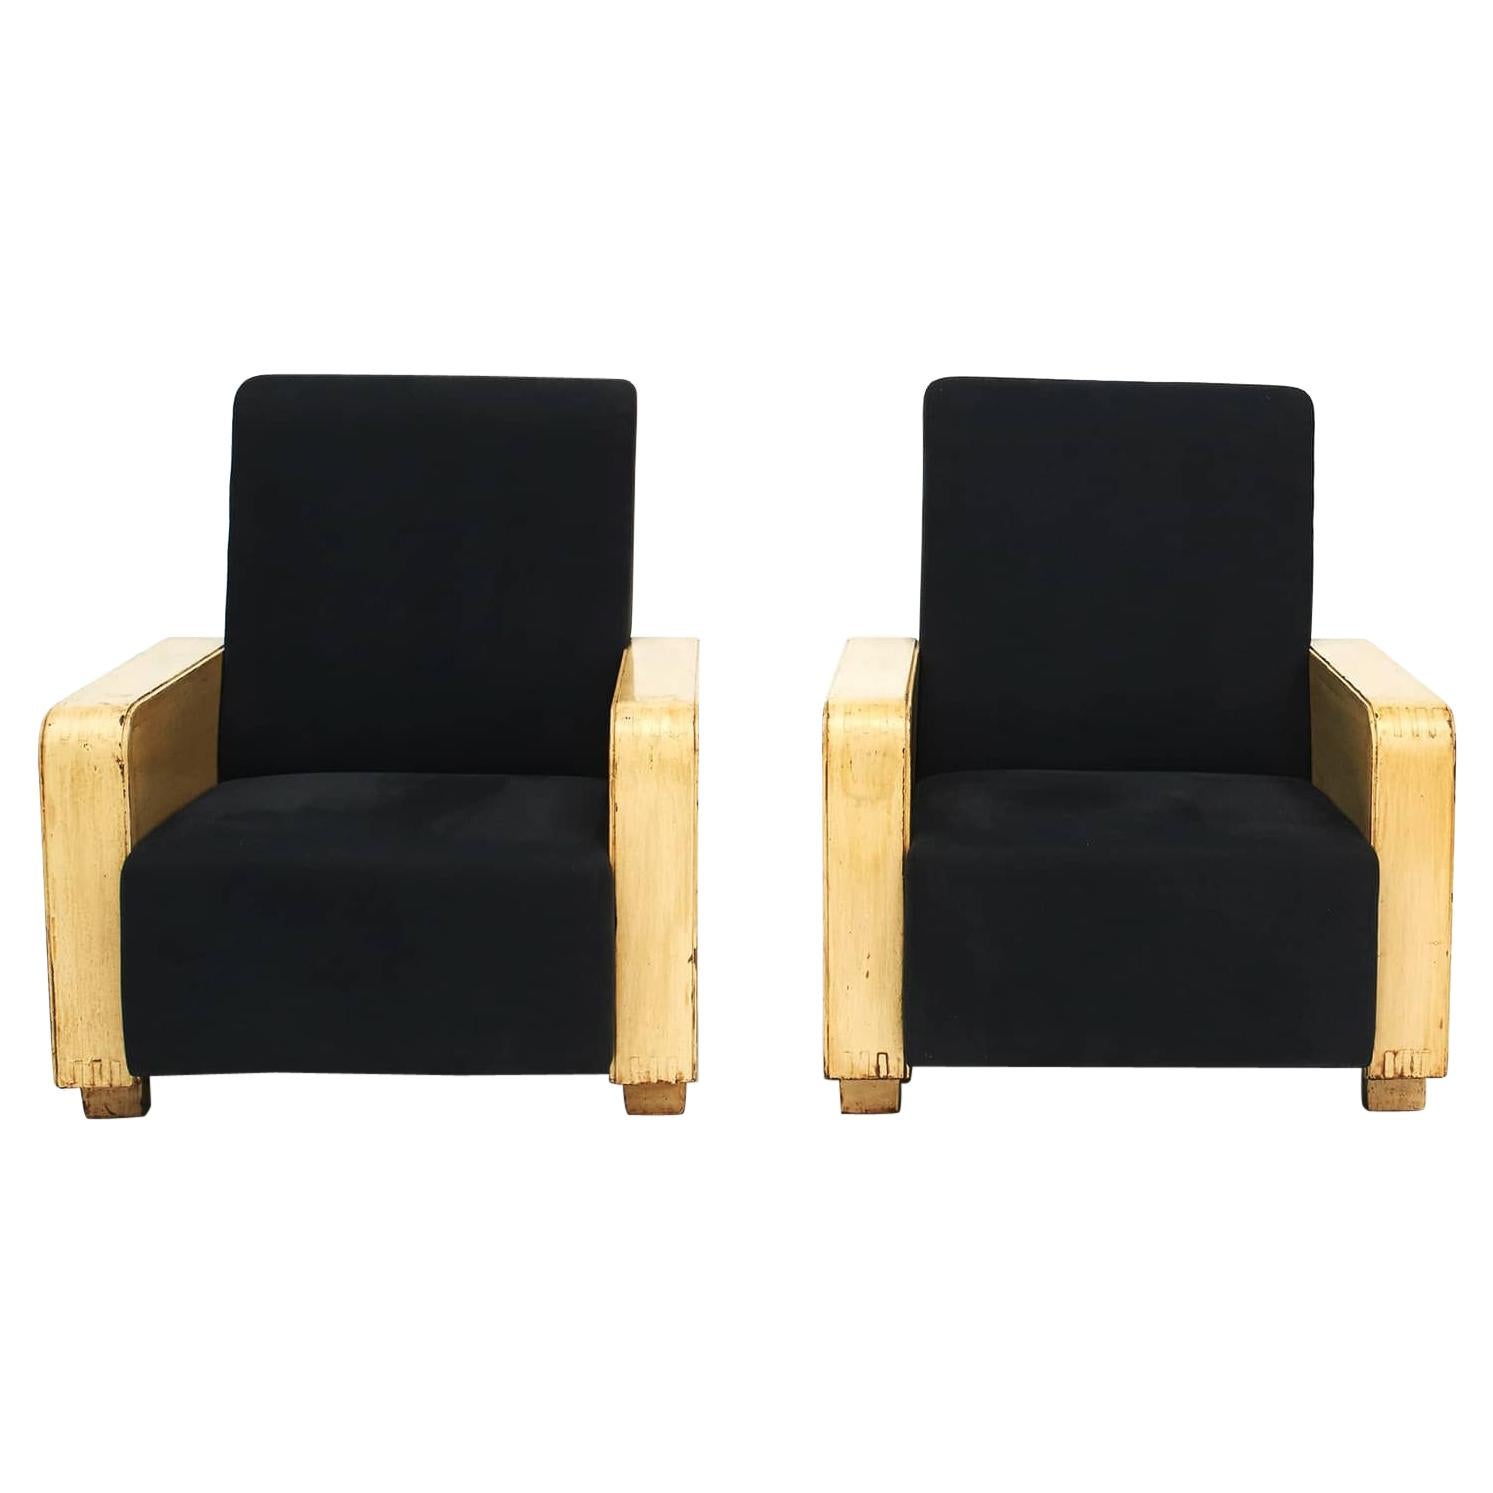 Pair of Chinese Art Deco Lounge Chairs, with Wooden Armrests